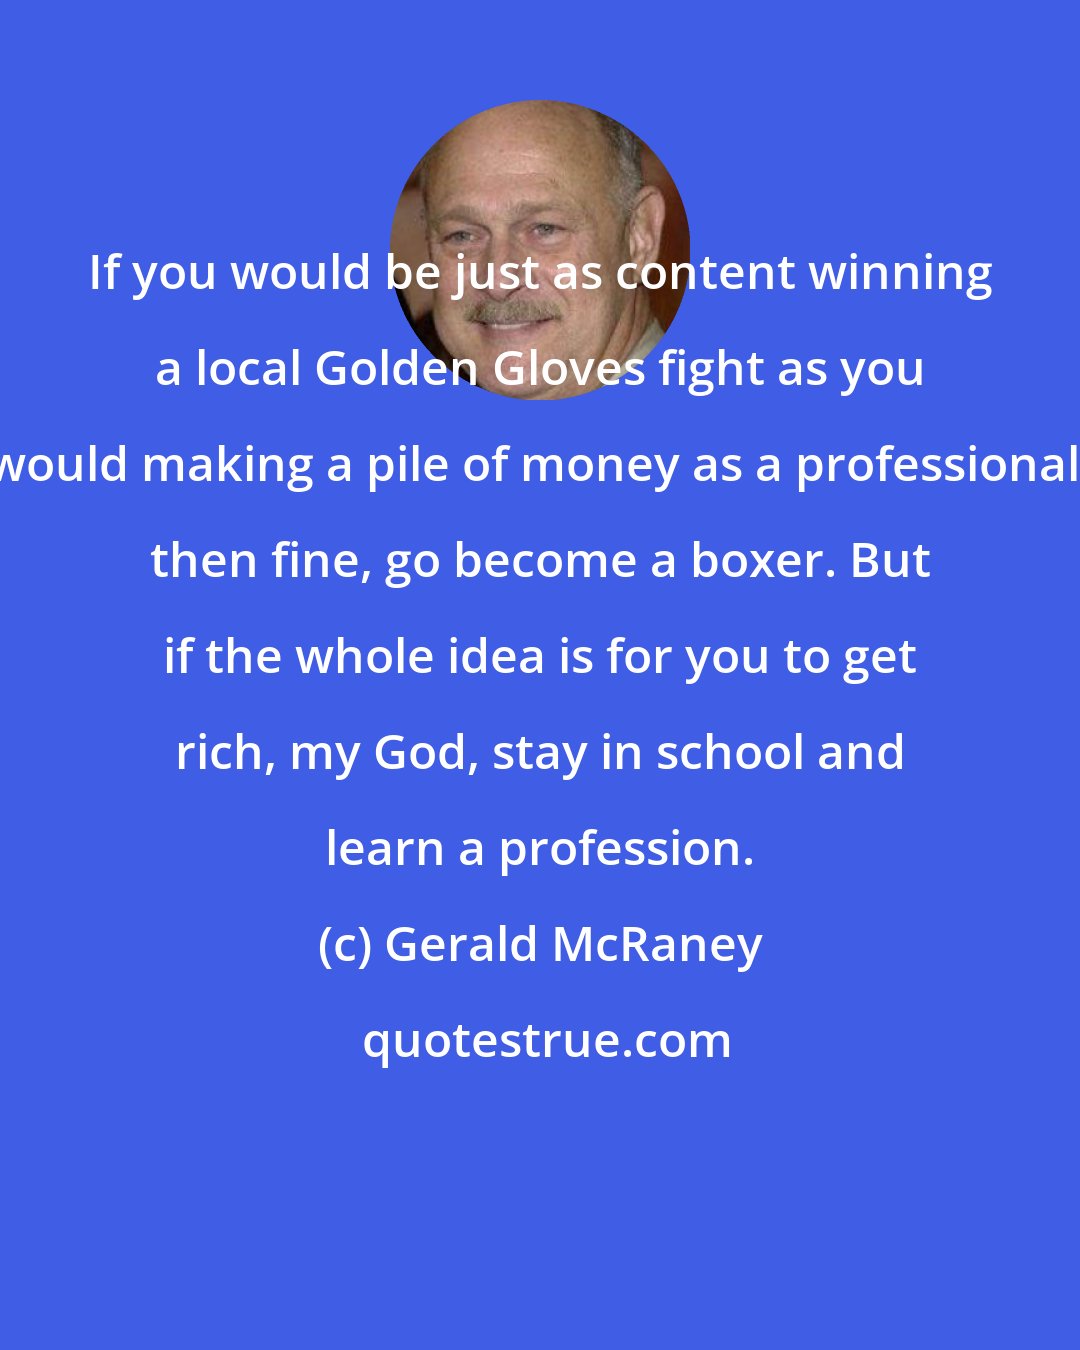 Gerald McRaney: If you would be just as content winning a local Golden Gloves fight as you would making a pile of money as a professional, then fine, go become a boxer. But if the whole idea is for you to get rich, my God, stay in school and learn a profession.